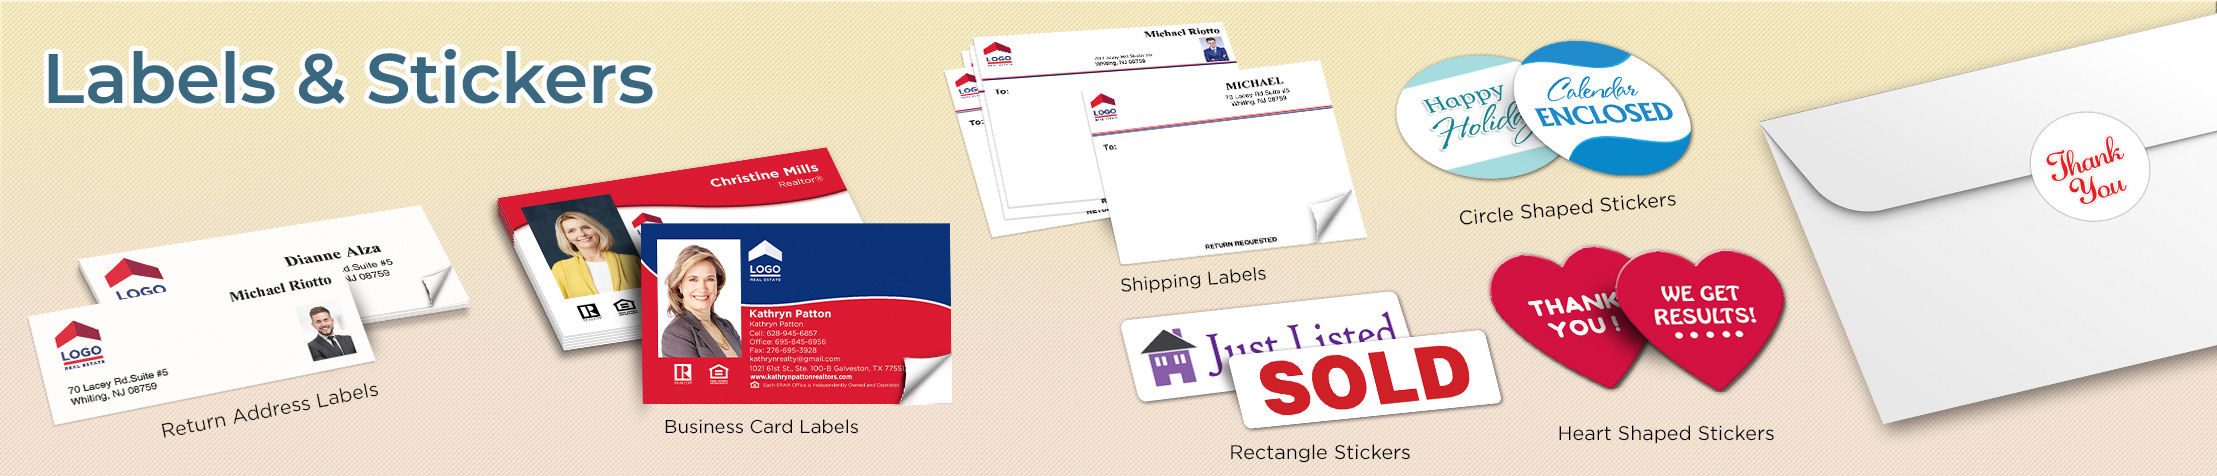 ERA Real Estate Labels and Stickers - ERA Real Estate business card labels, return address labels, shipping labels, and assorted stickers | BestPrintBuy.com